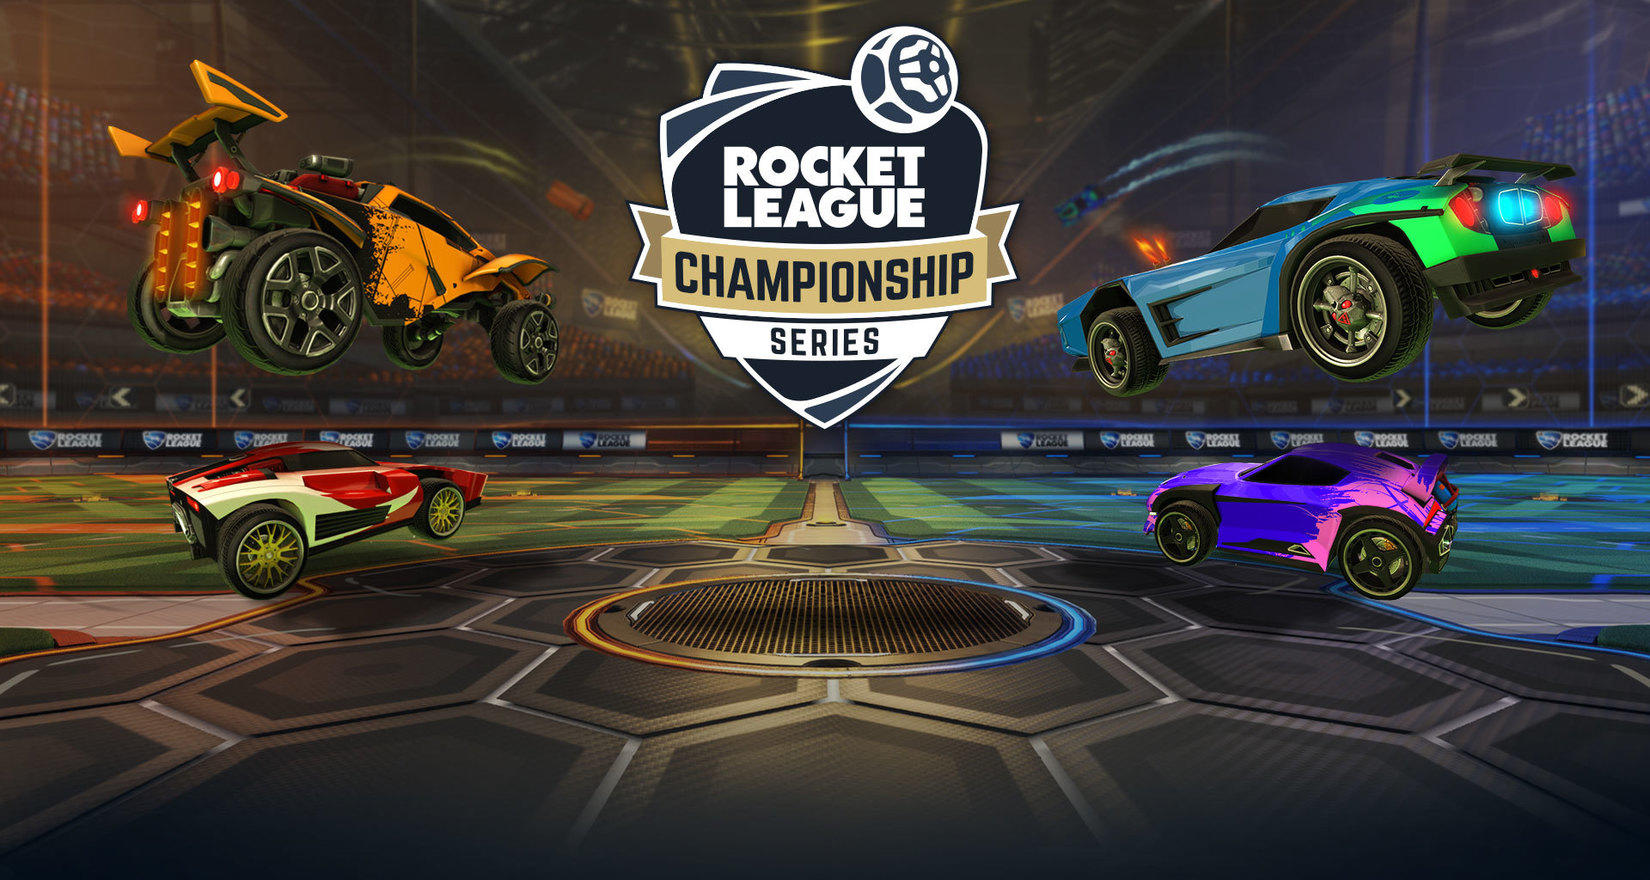 Rocket Leagues race to become a Tier 1 esport